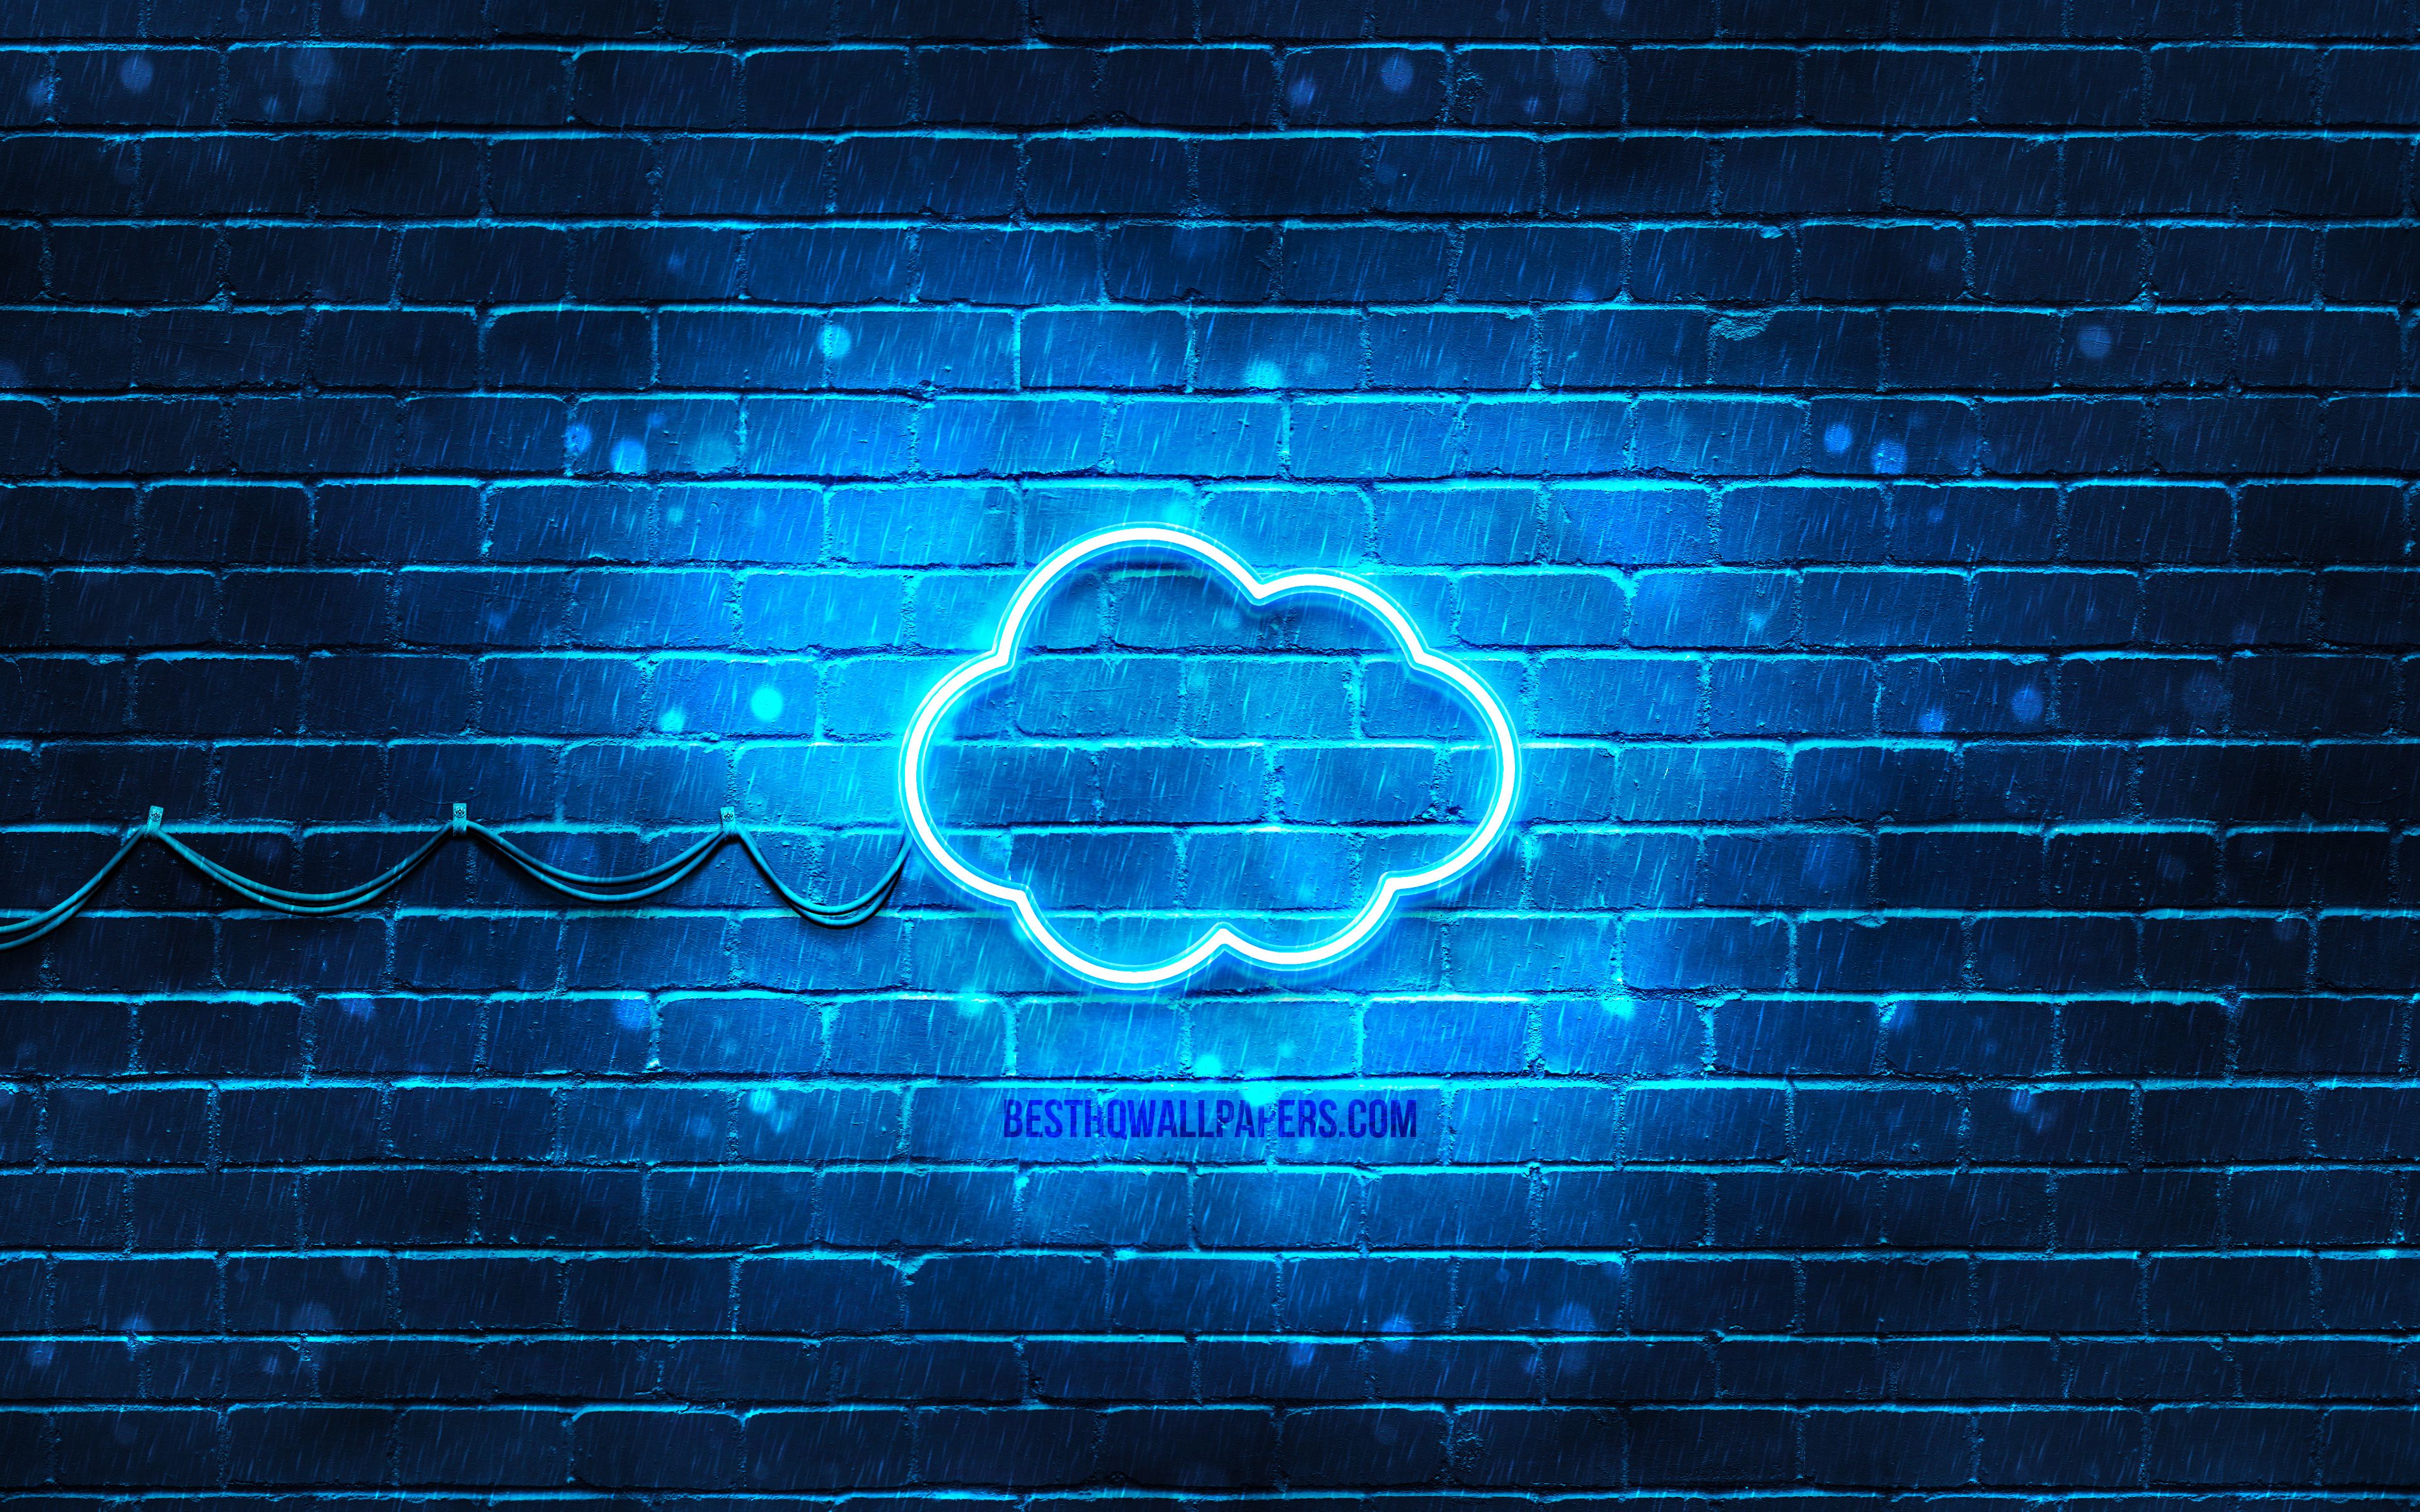 Download wallpaper Cloud neon icon, 4k, blue background, neon symbols, Cloud, creative, neon icons, Cloud sign, computer signs, Cloud icon, computer icons for desktop with resolution 3840x2400. High Quality HD picture wallpaper